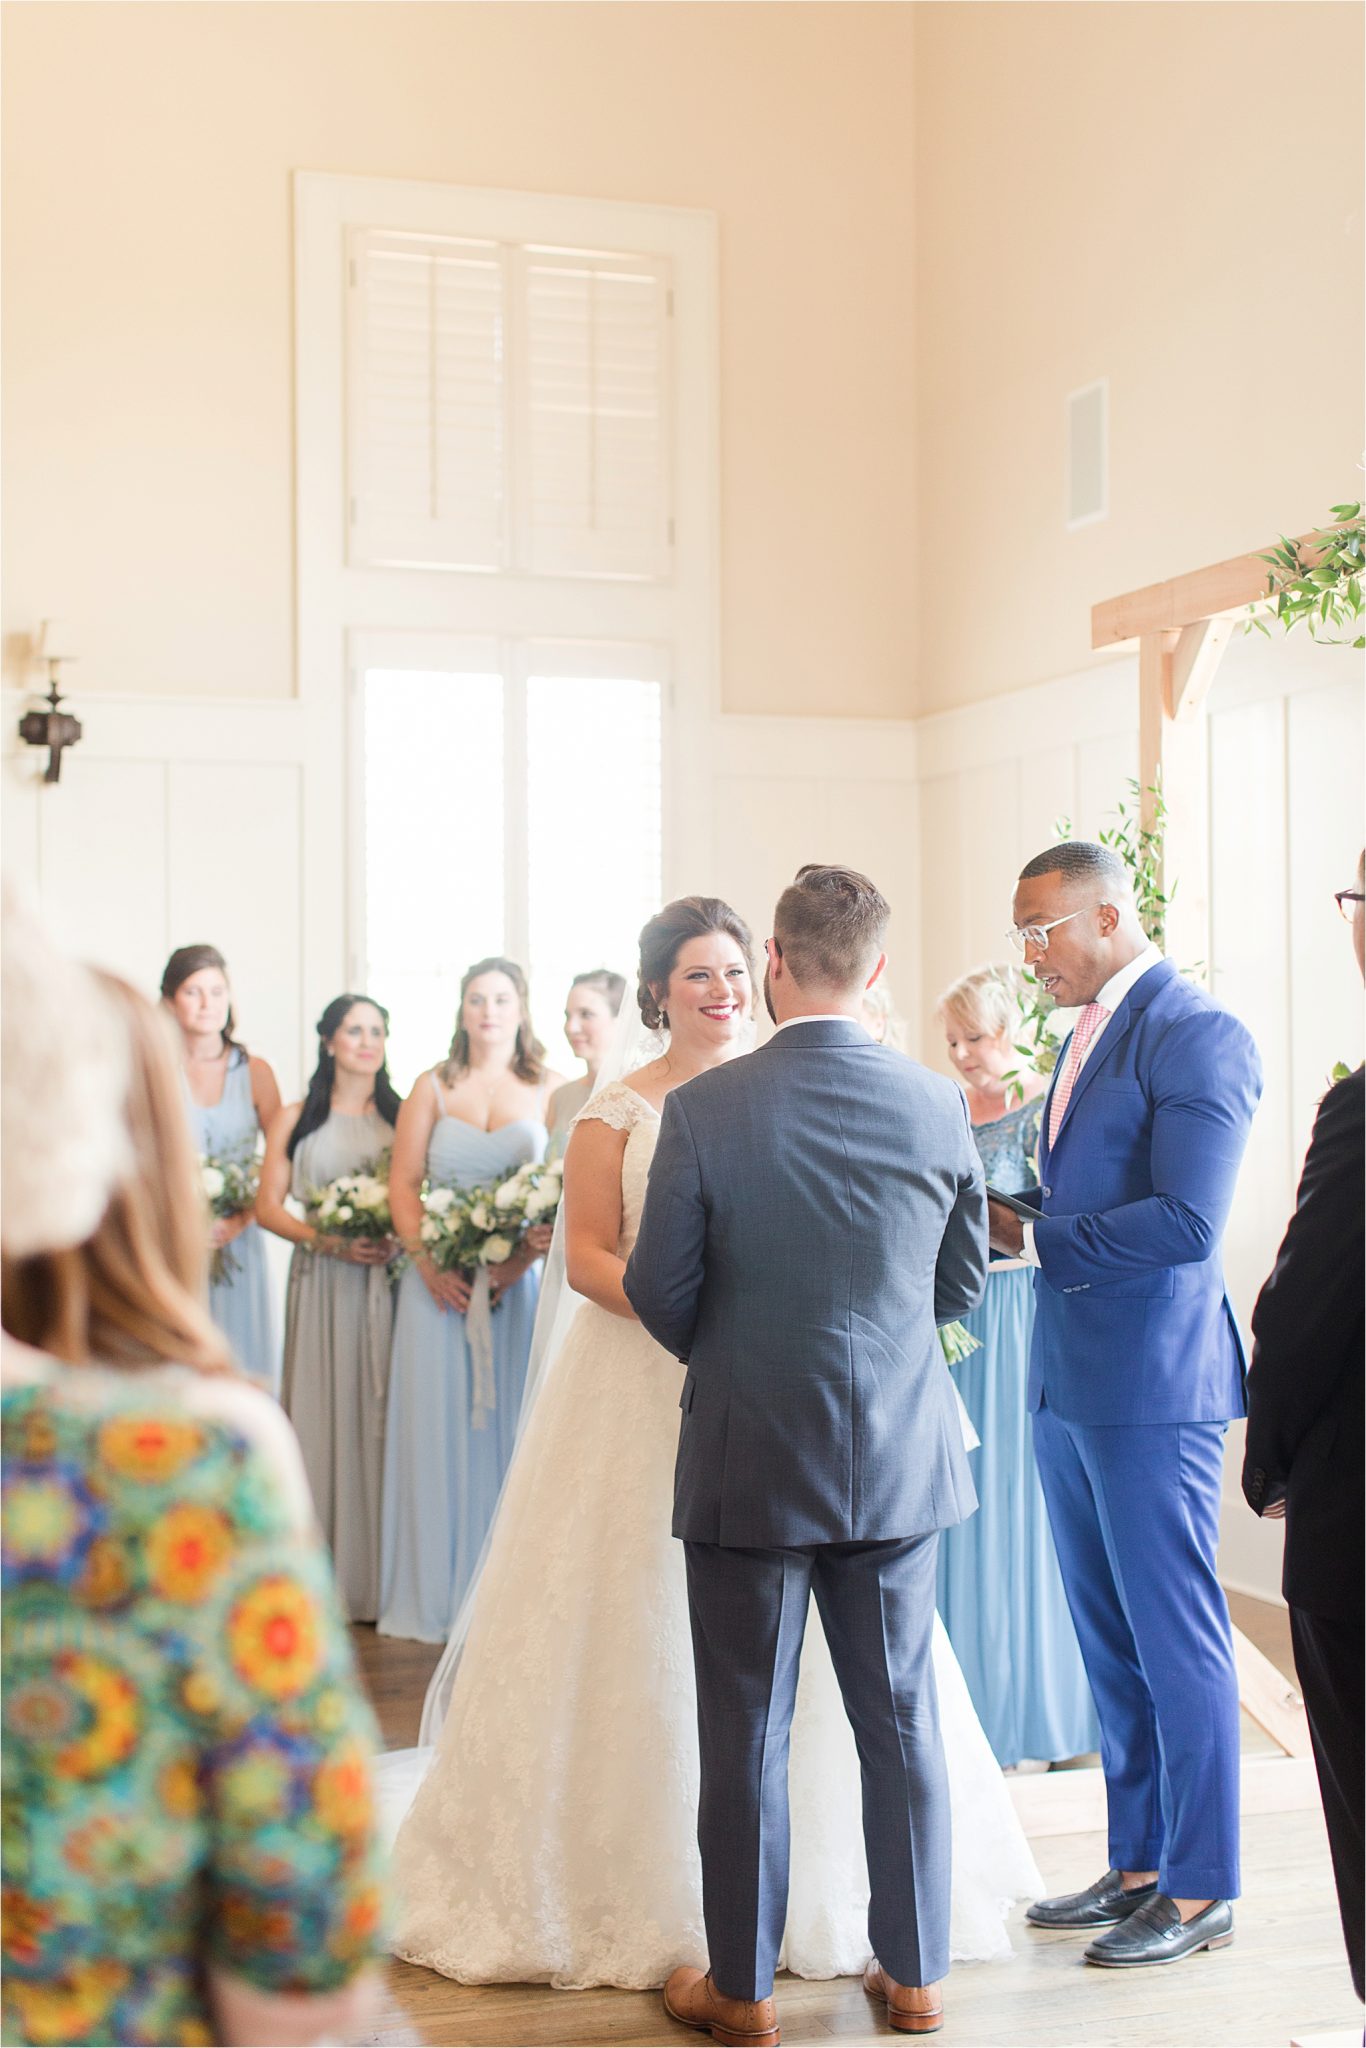 Pastel Themed Wedding-The Chapel at the Waters-Montgomery Alabama Photographer-Miles & Meredyth-Blue Themed Wedding-Alabama Wedding Venue-Wedding Details